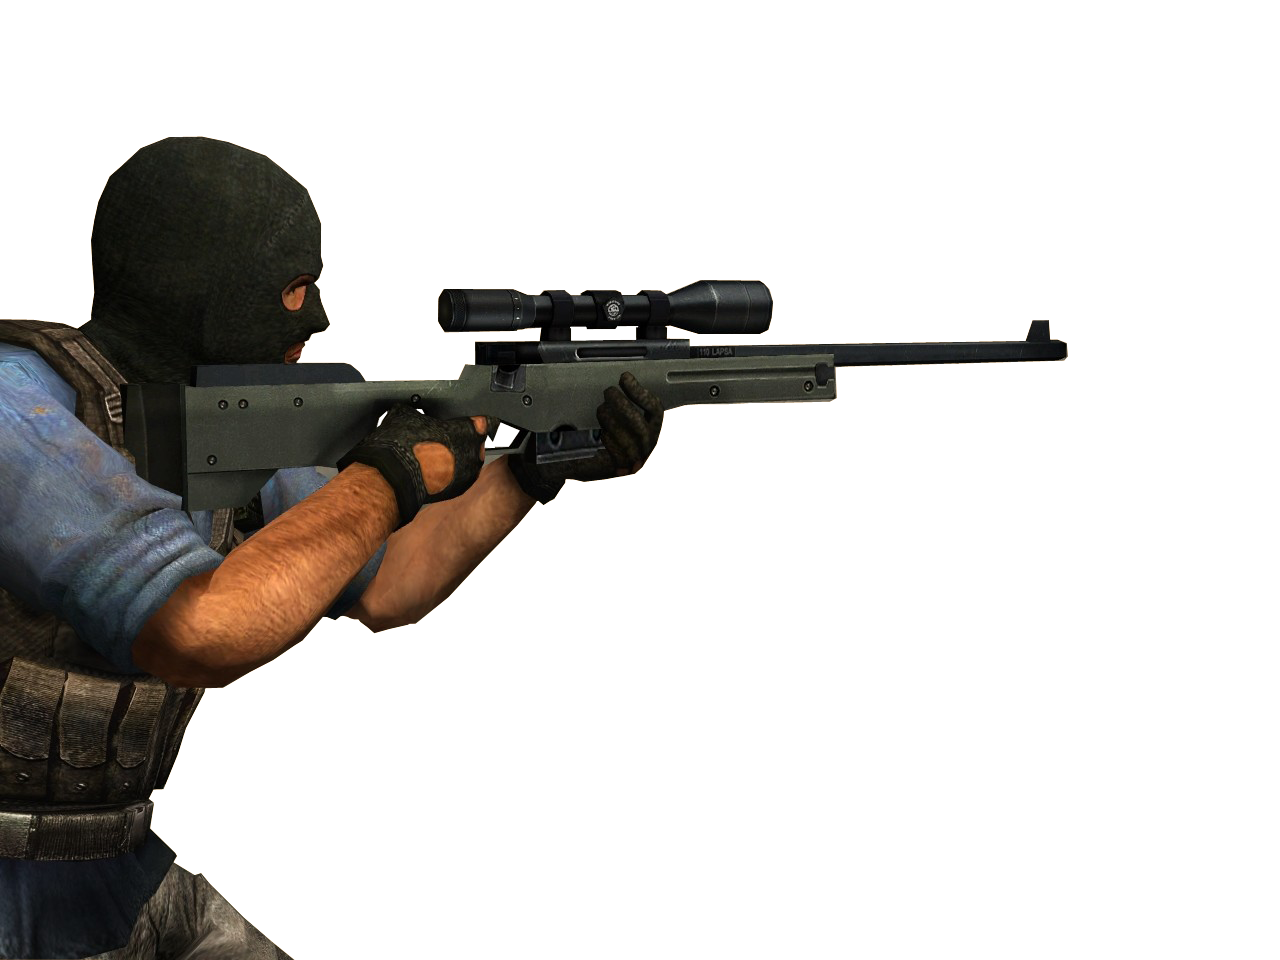 counter strike png image collection download crazypngm crazy png images download #30399